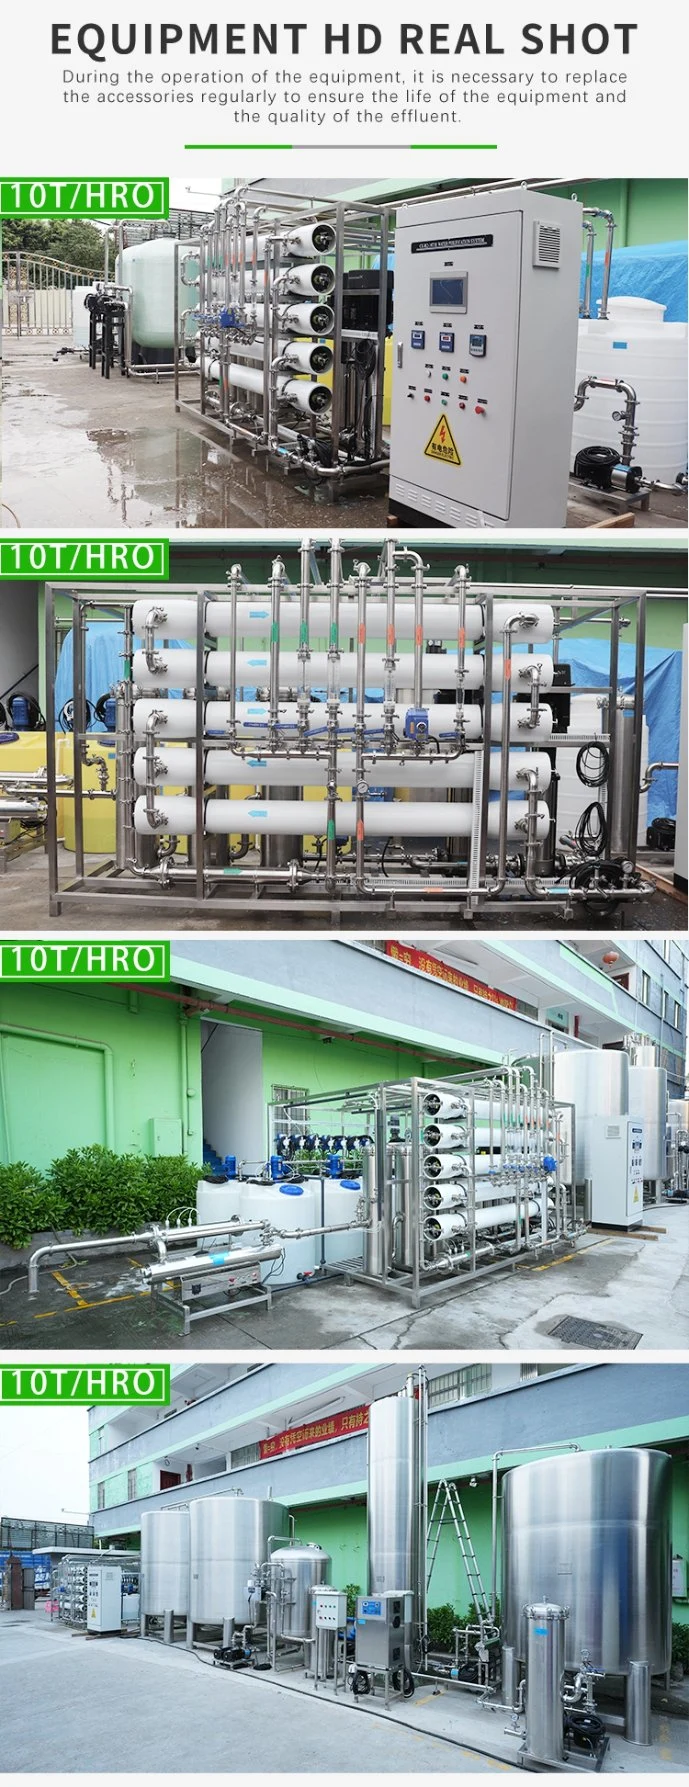 Reverse Osmosis Water Filtration Technologies System Applications as Industrial